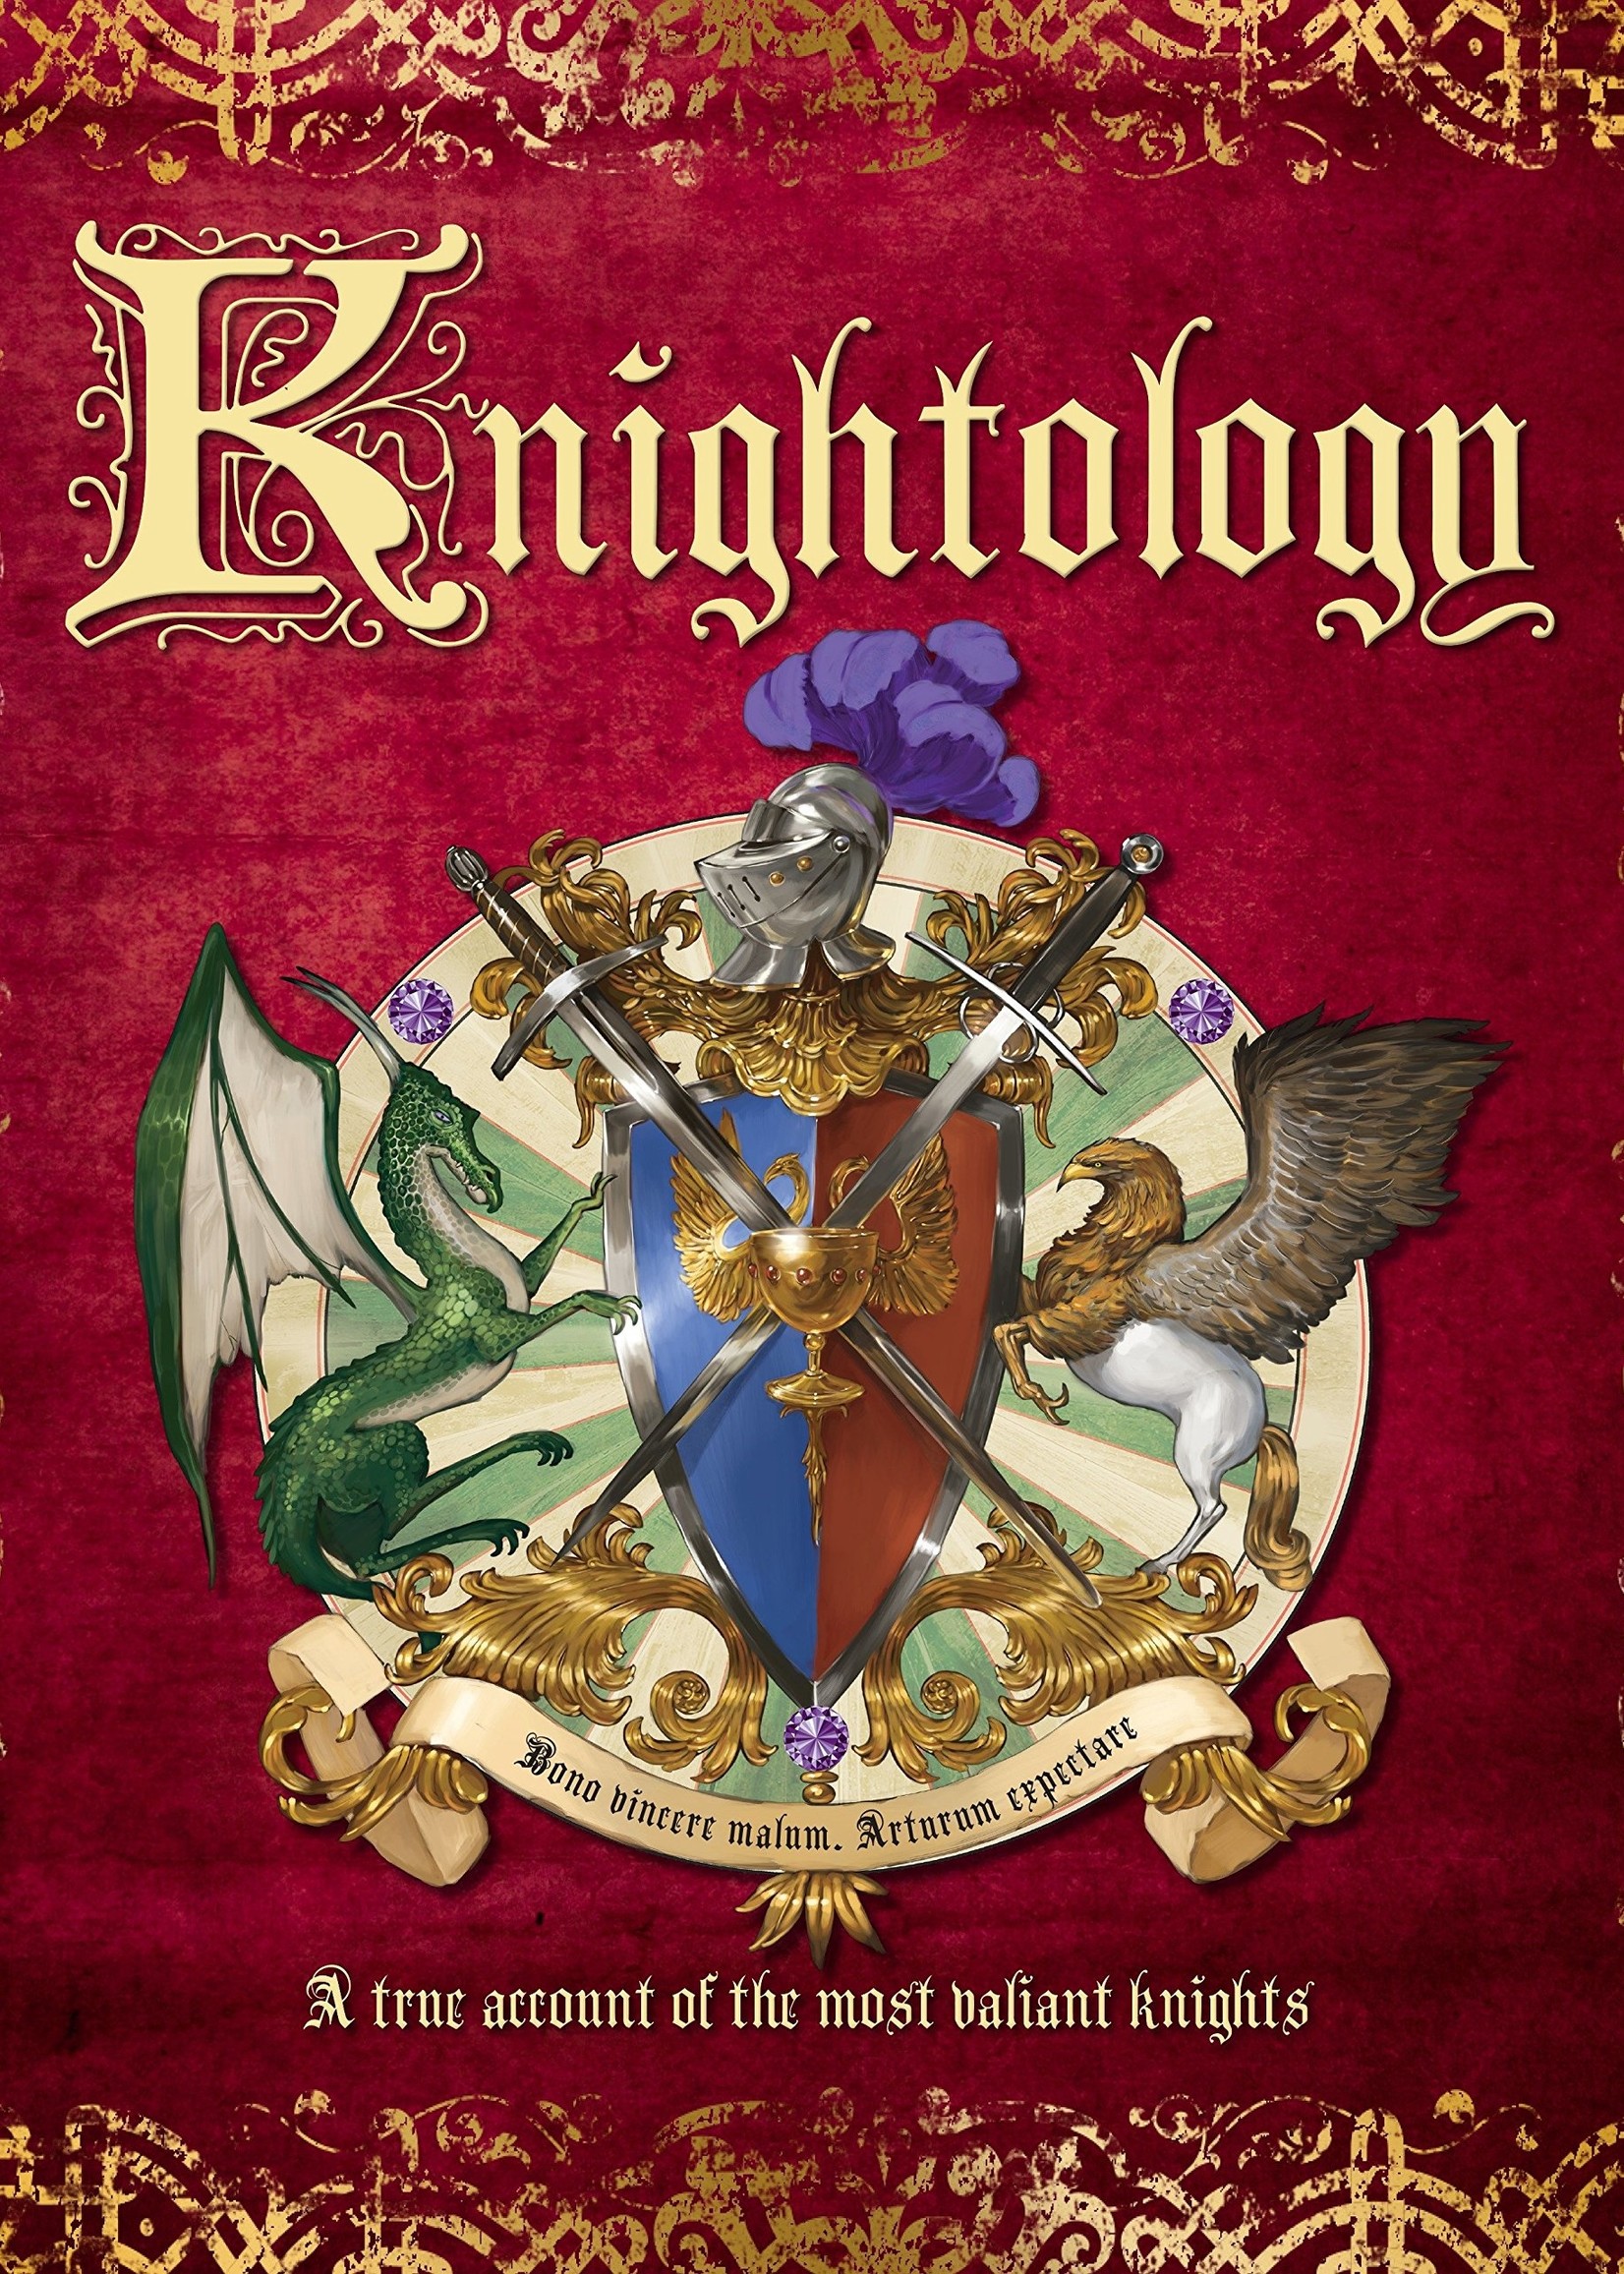 Knightology, A True Account of the Most Valiant Knights - Hardcover